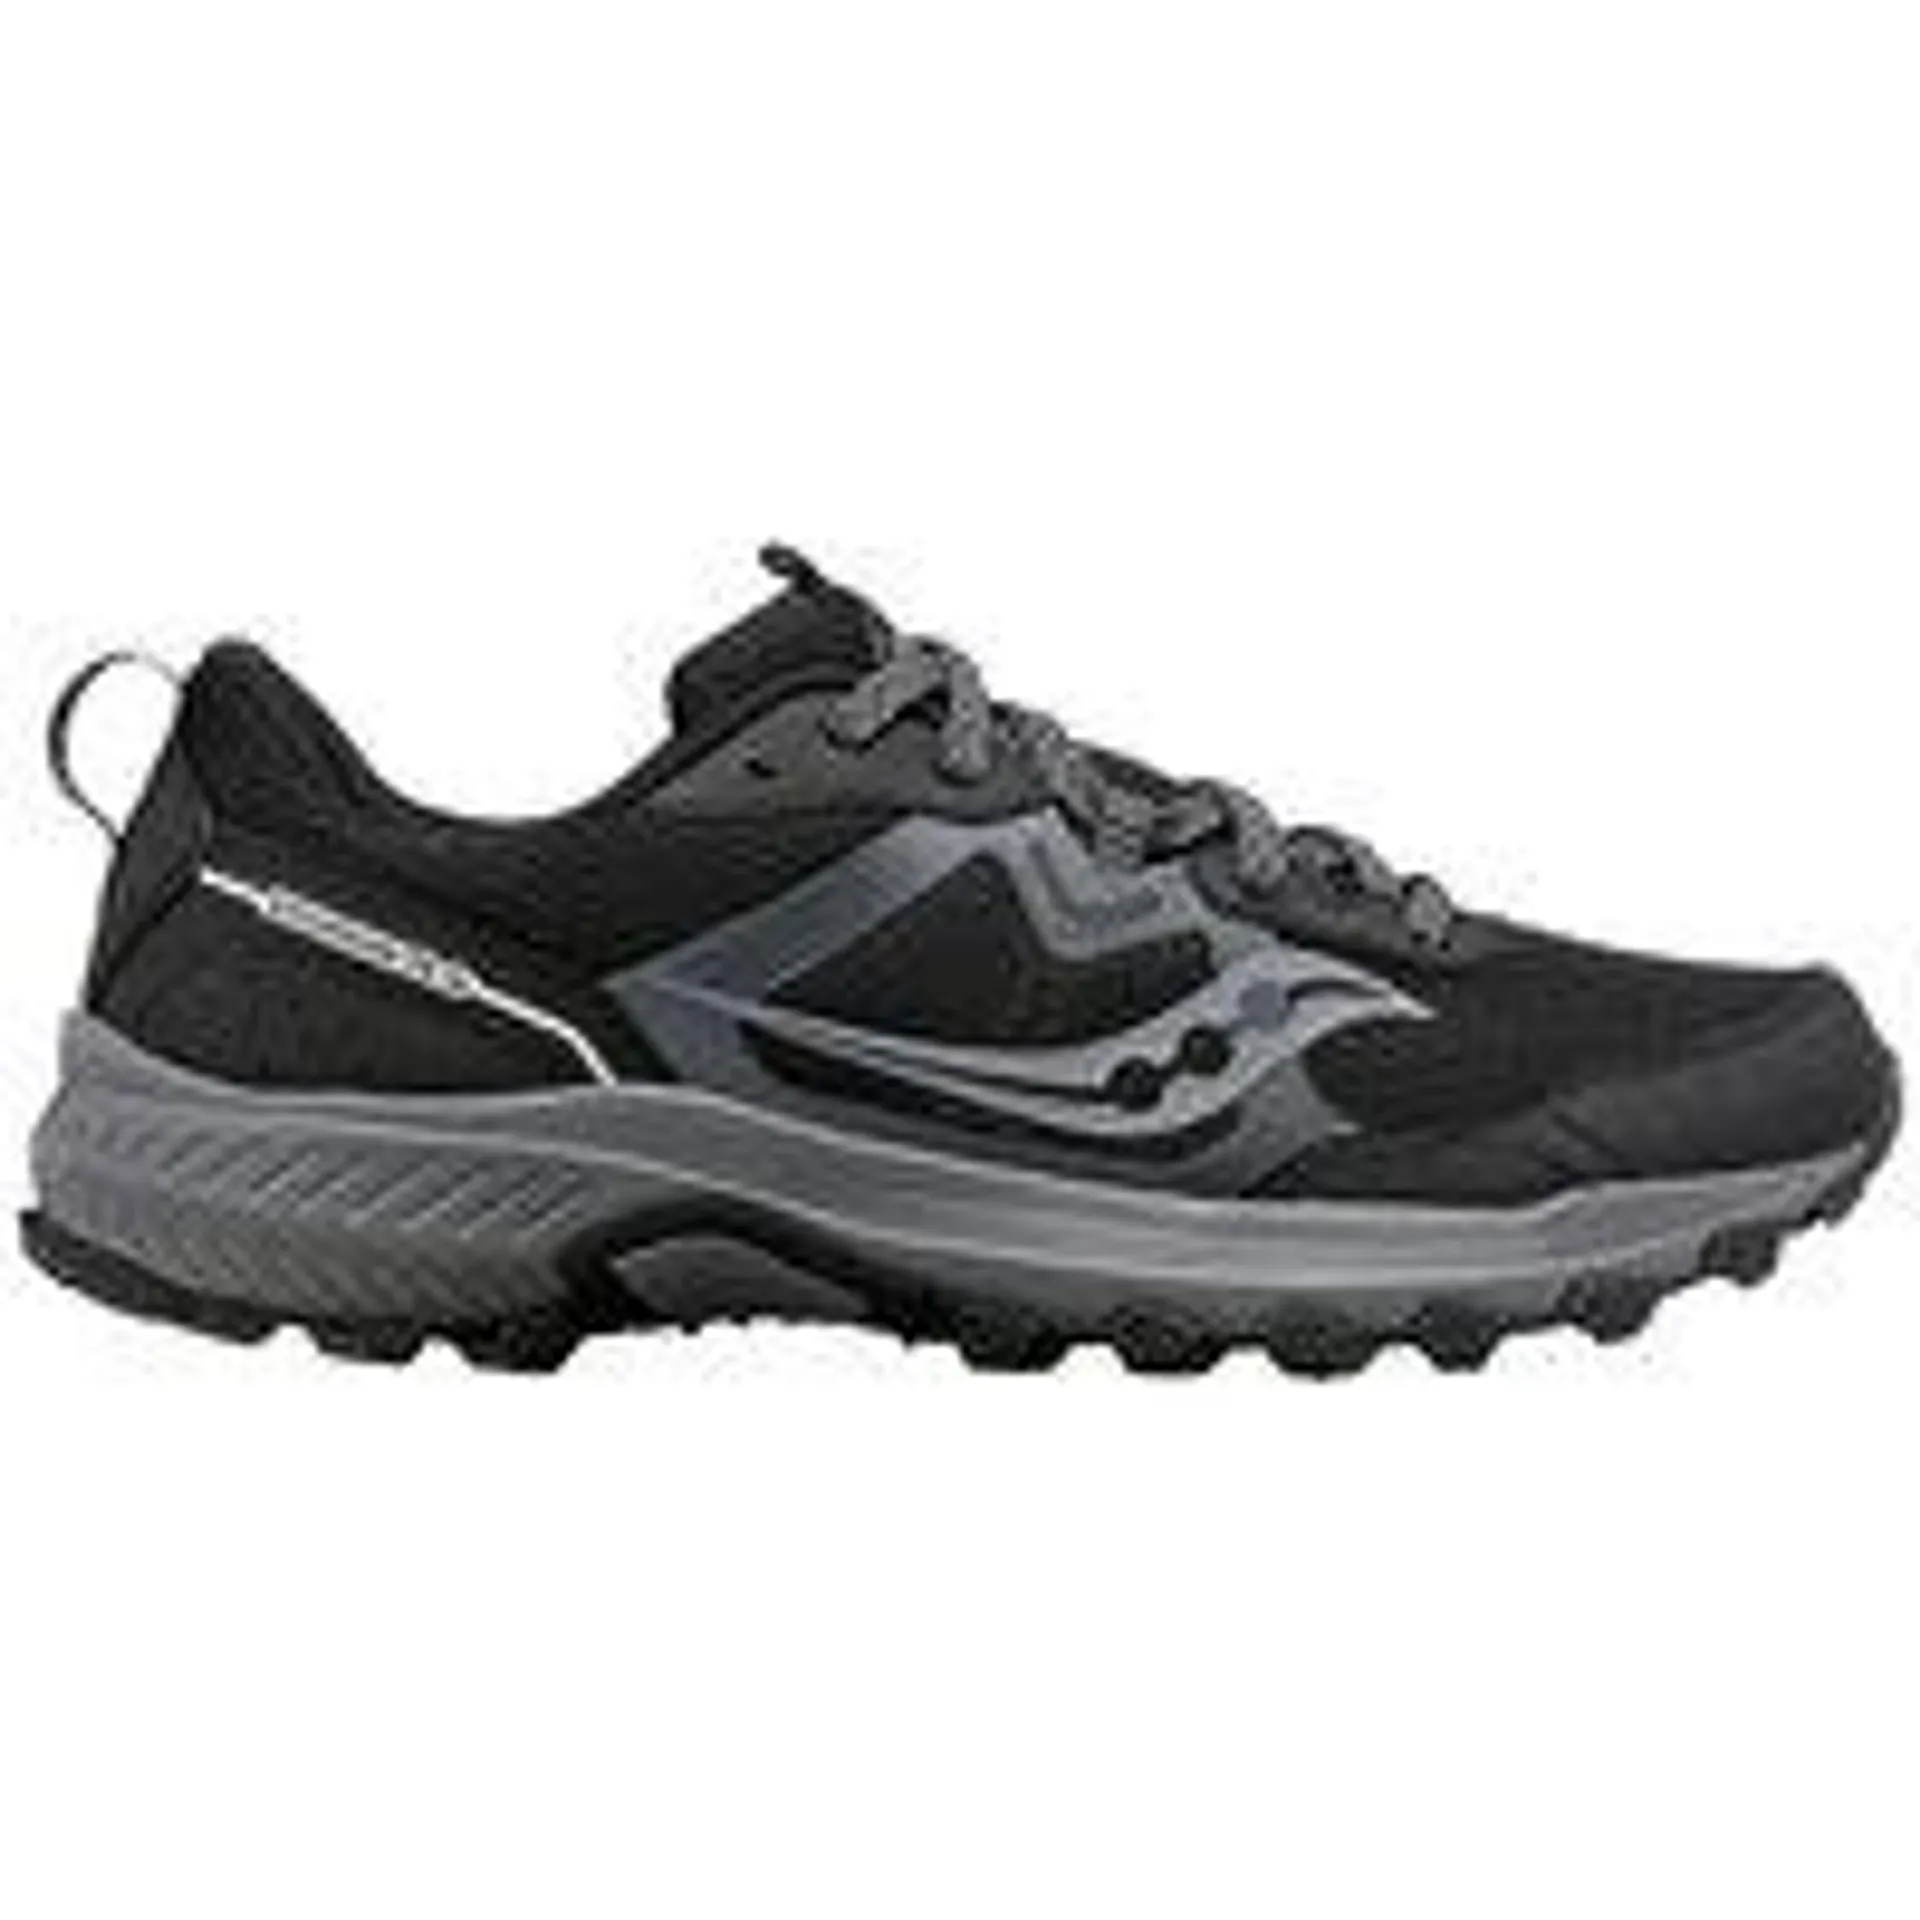 Saucony Excursion TR16 Men's Trail Running Shoes